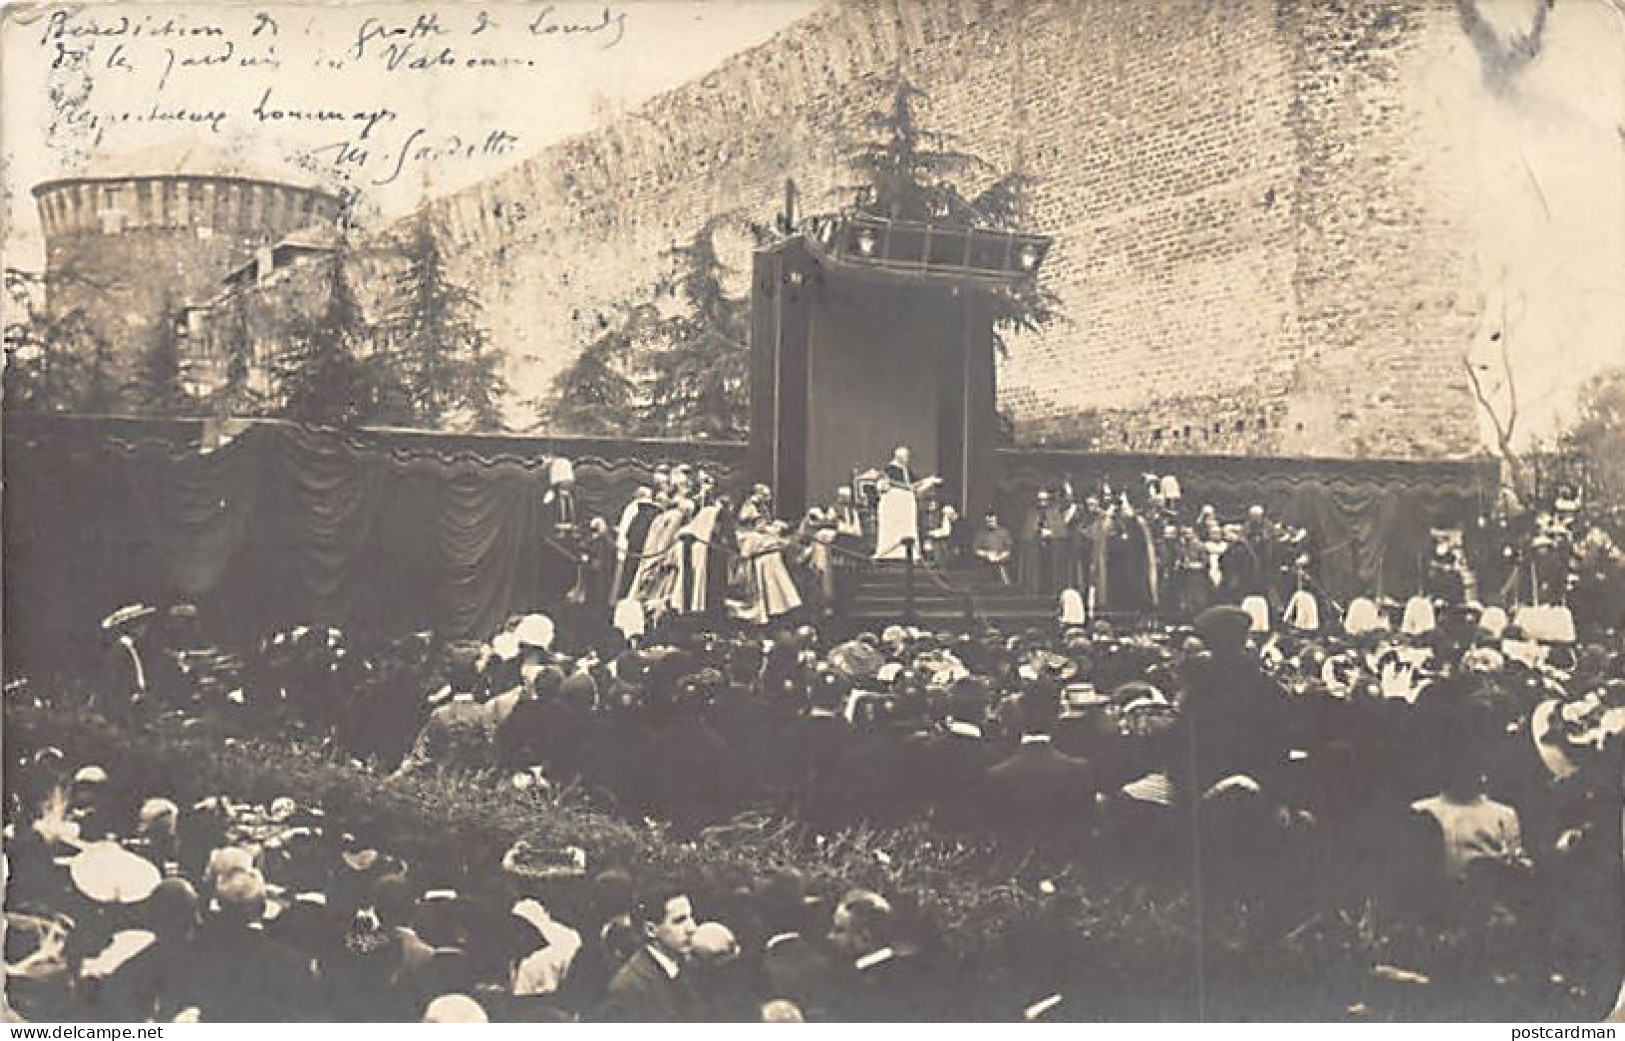 Vatican - Pope Pius X Blessing The Grotto Of Lourdes In The Gardens Of The Holy City, Year 1905 - REAL PHOTO. - Vatikanstadt